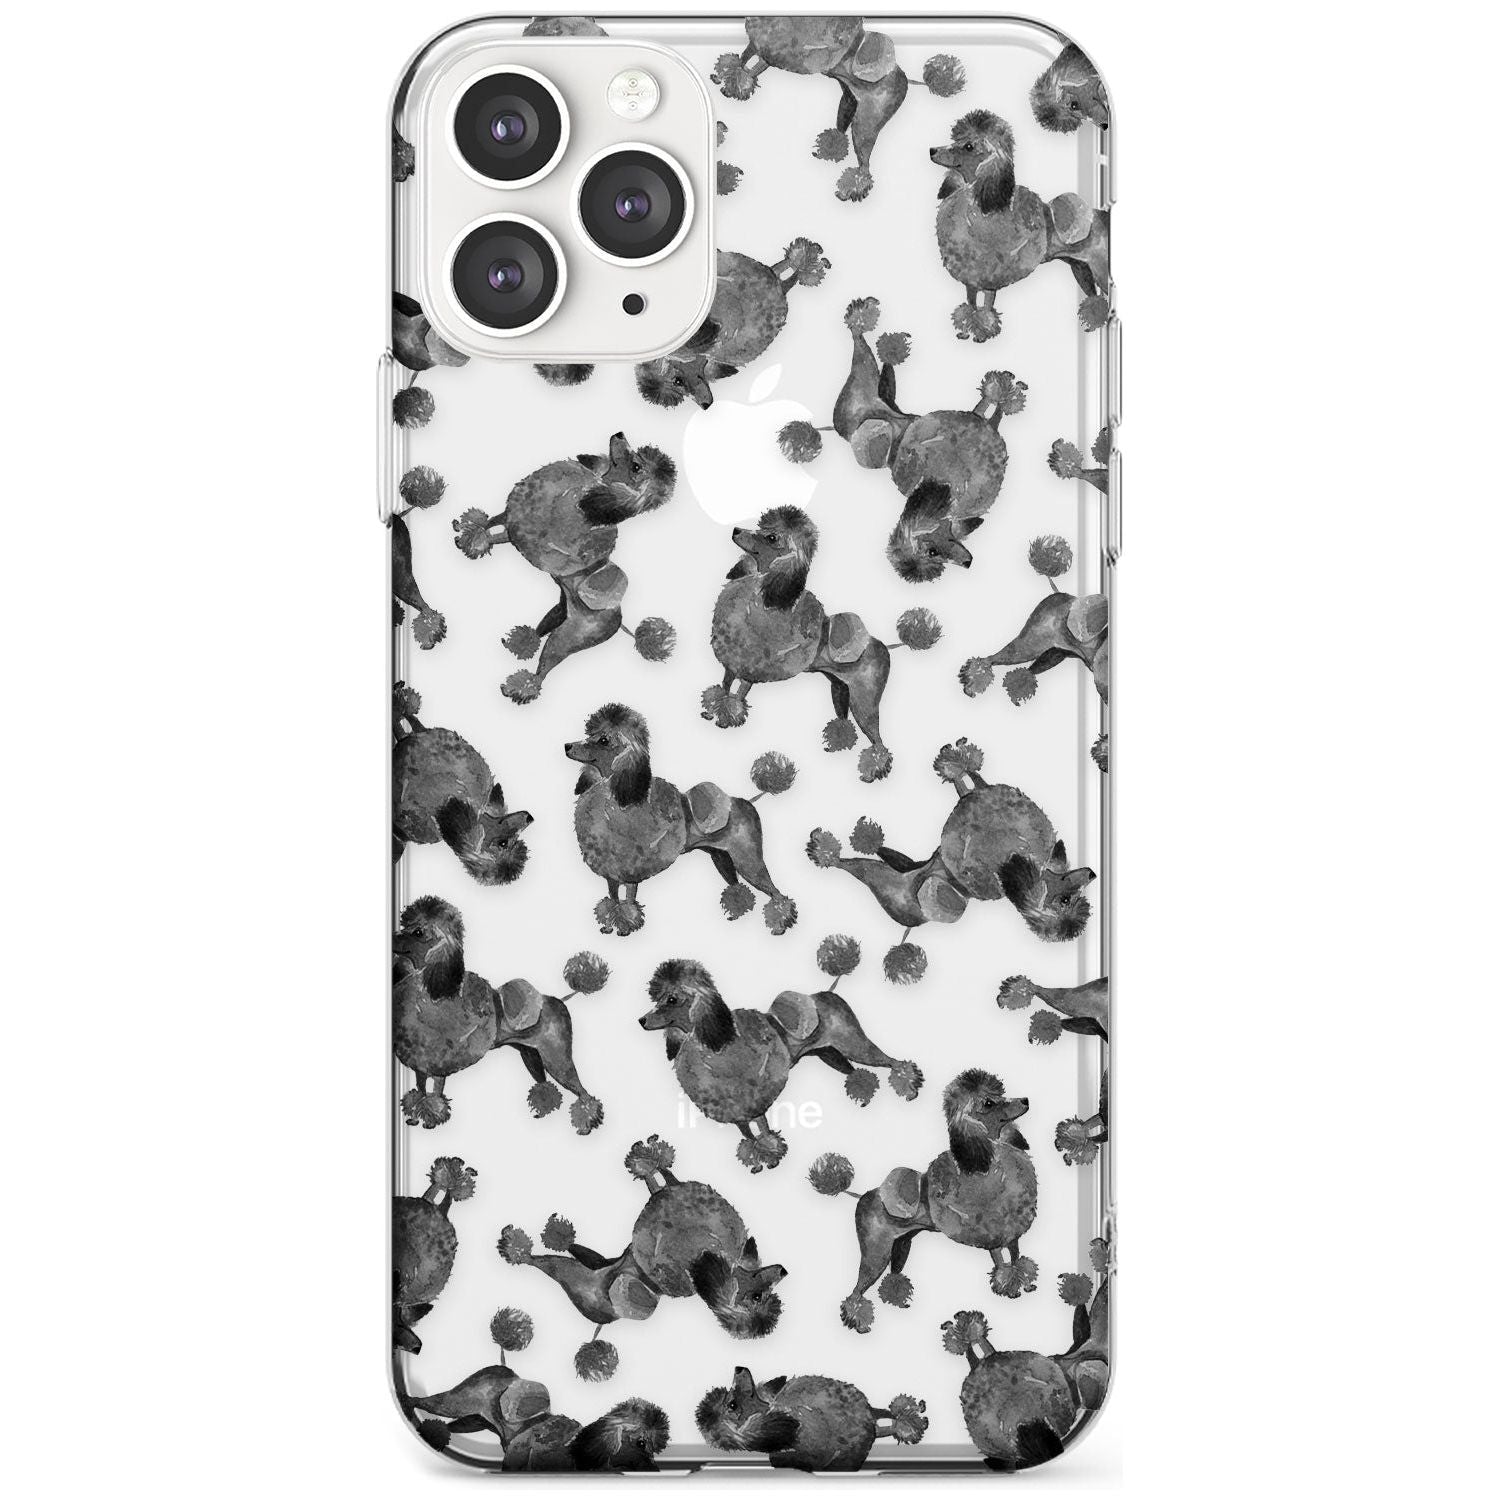 Poodle (Black) Watercolour Dog Pattern Slim TPU Phone Case for iPhone 11 Pro Max